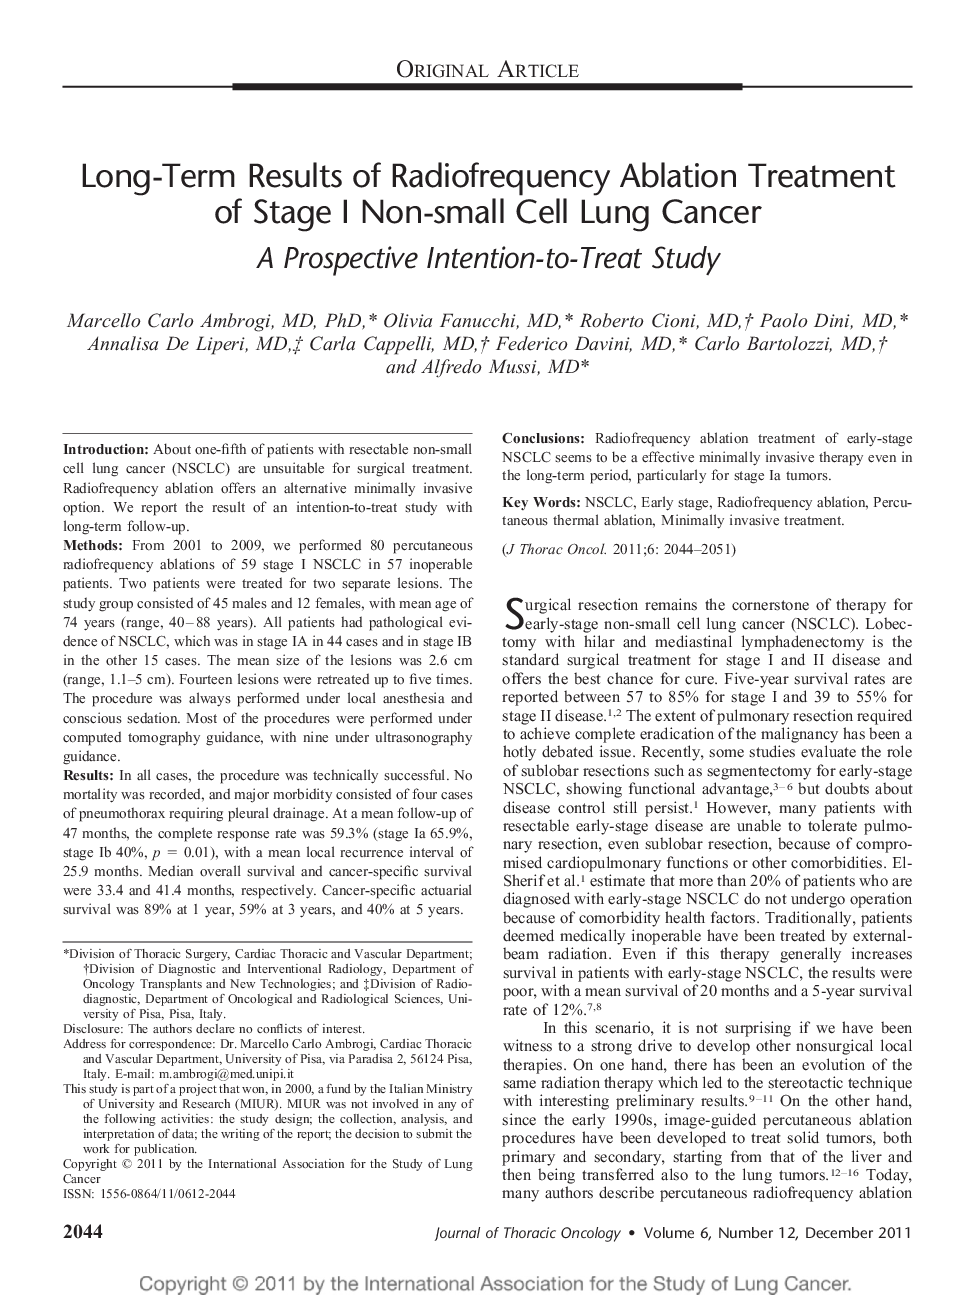 Long-Term Results of Radiofrequency Ablation Treatment of Stage I Non-small Cell Lung Cancer: A Prospective Intention-to-Treat Study 